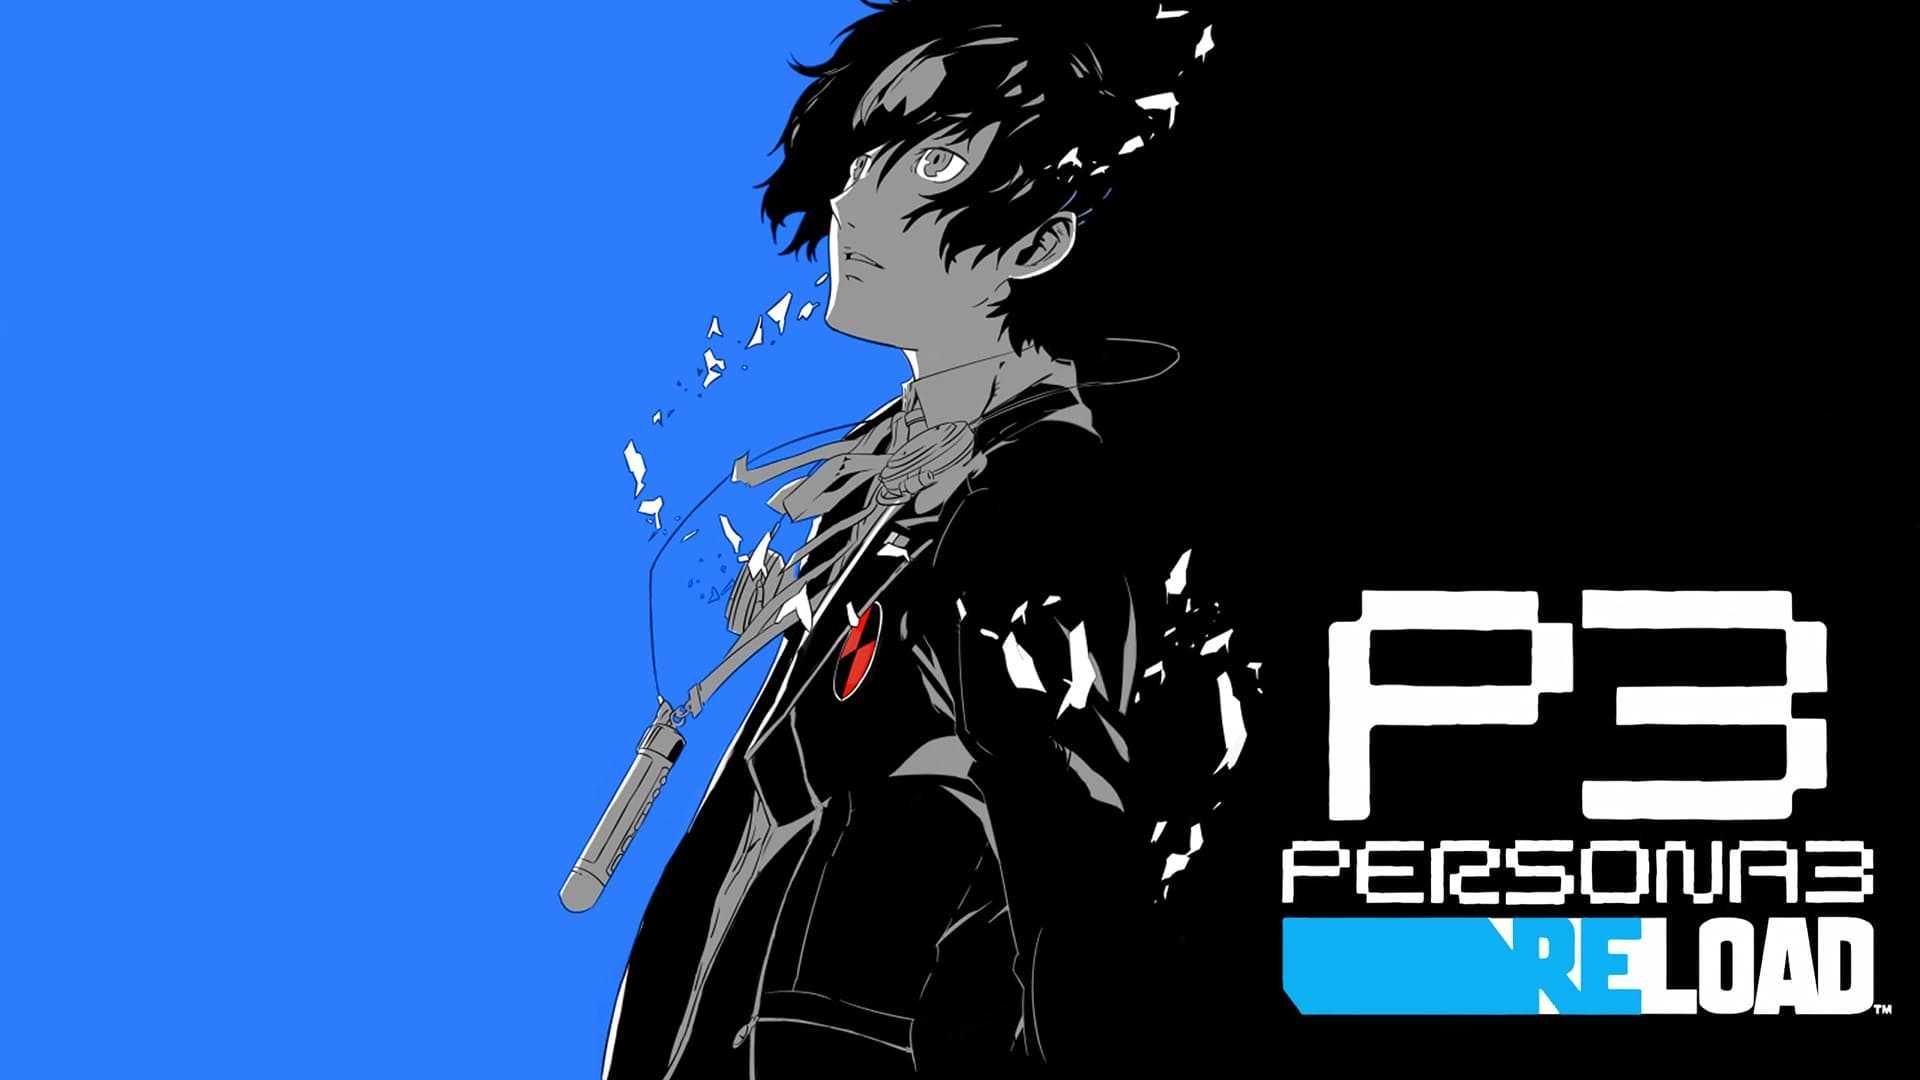 Persona 3 Reload Wallpapers - Top Free Persona 3 Reload Backgrounds ...